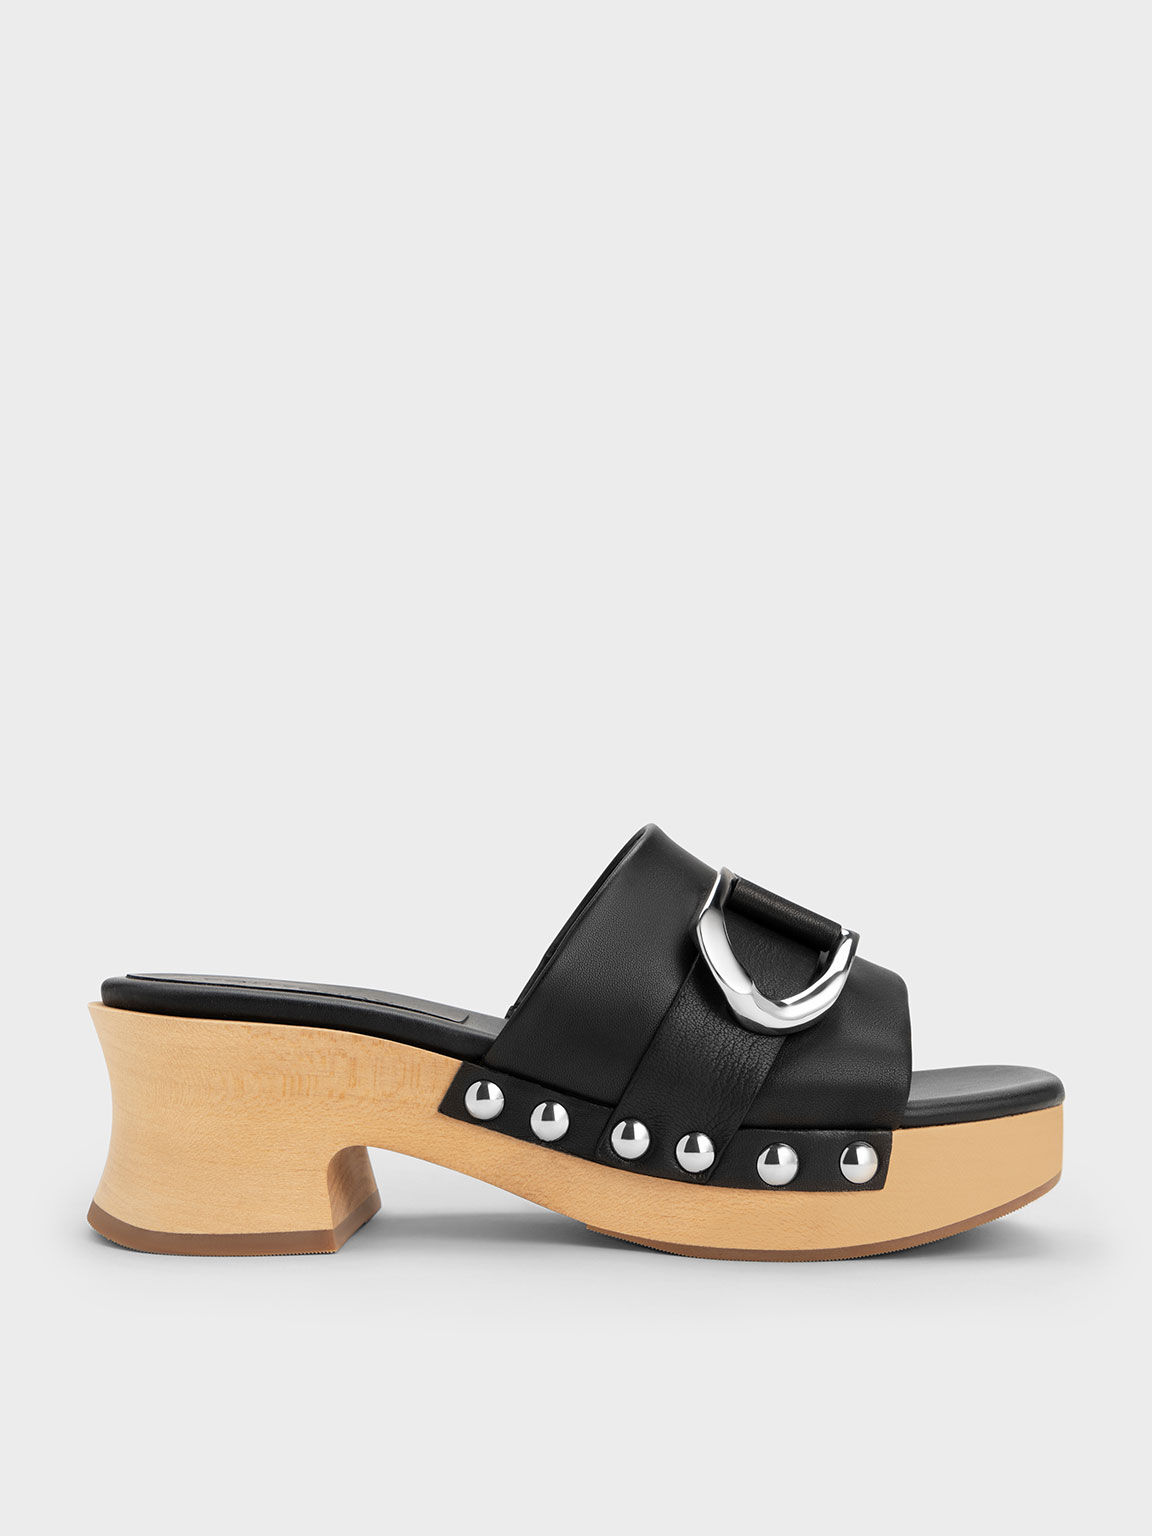 Women's Wedges | Shop Exclusives Styles | CHARLES & KEITH UK